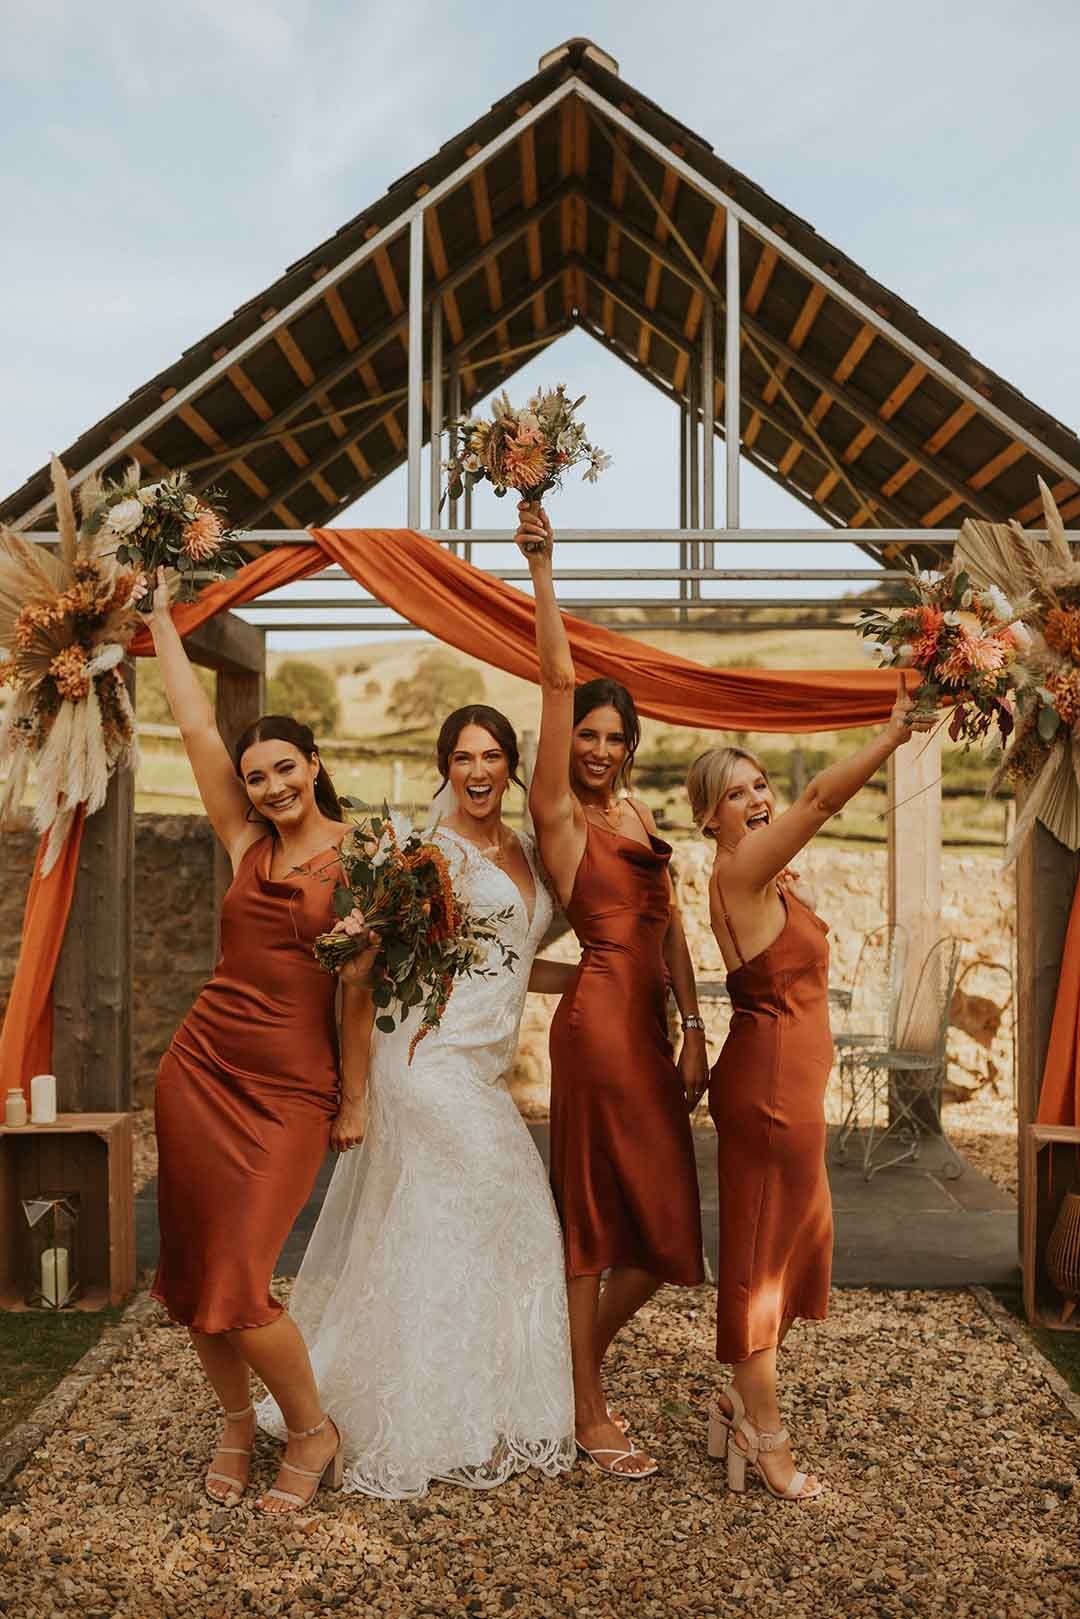 13 Beautiful Bridesmaid Looks to Steal for your Girls | weddingsonline